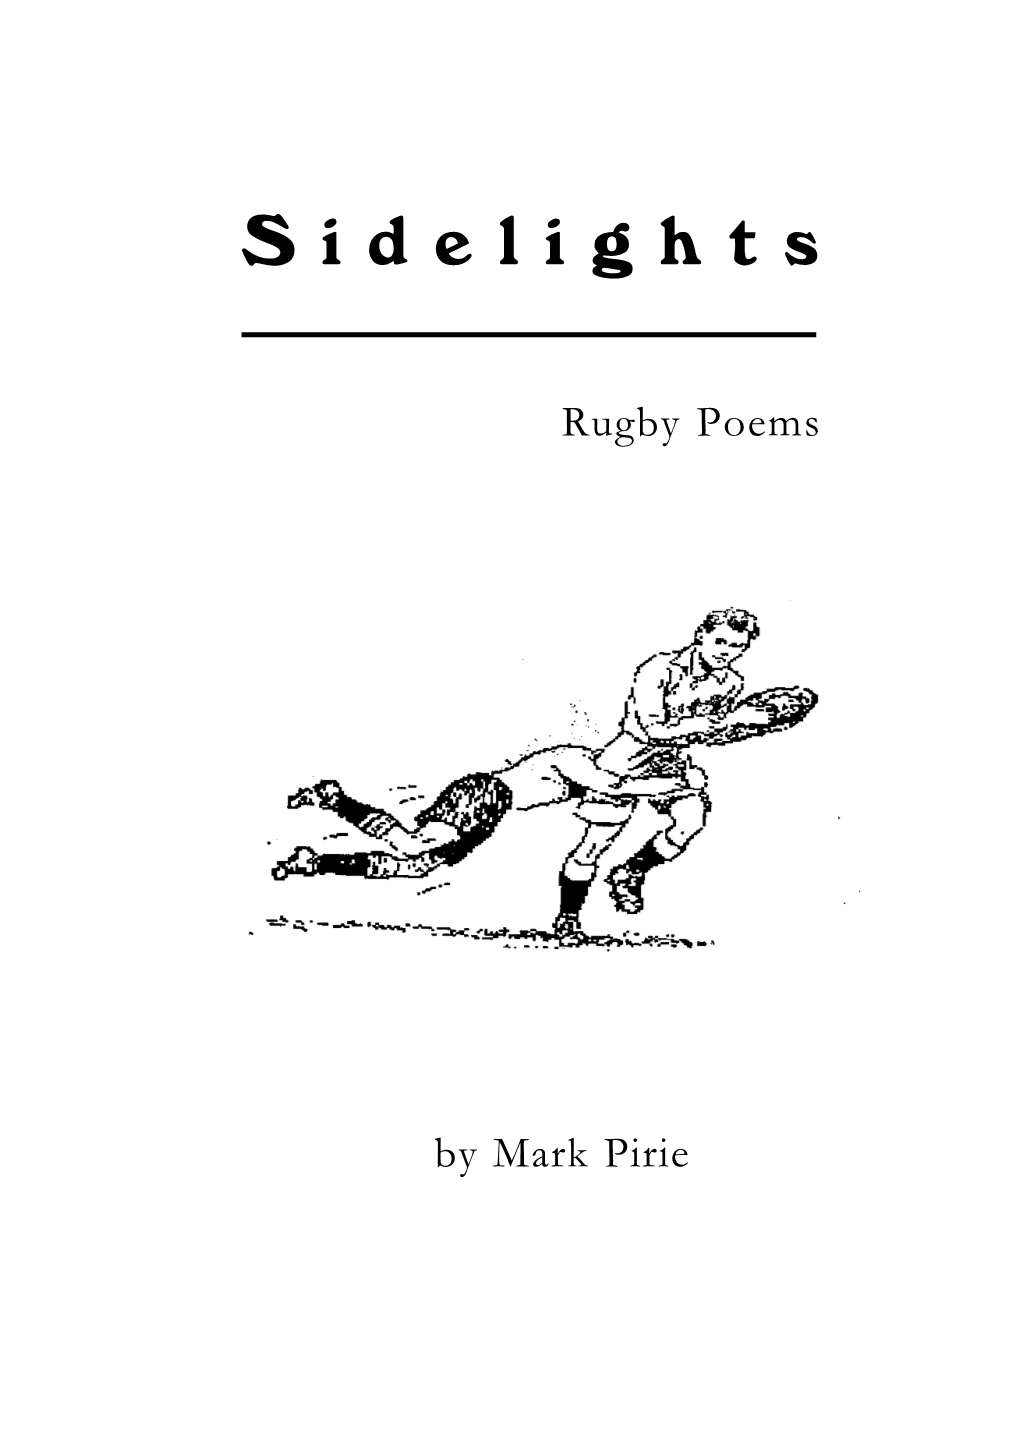 Rugby Poems by Mark Pirie